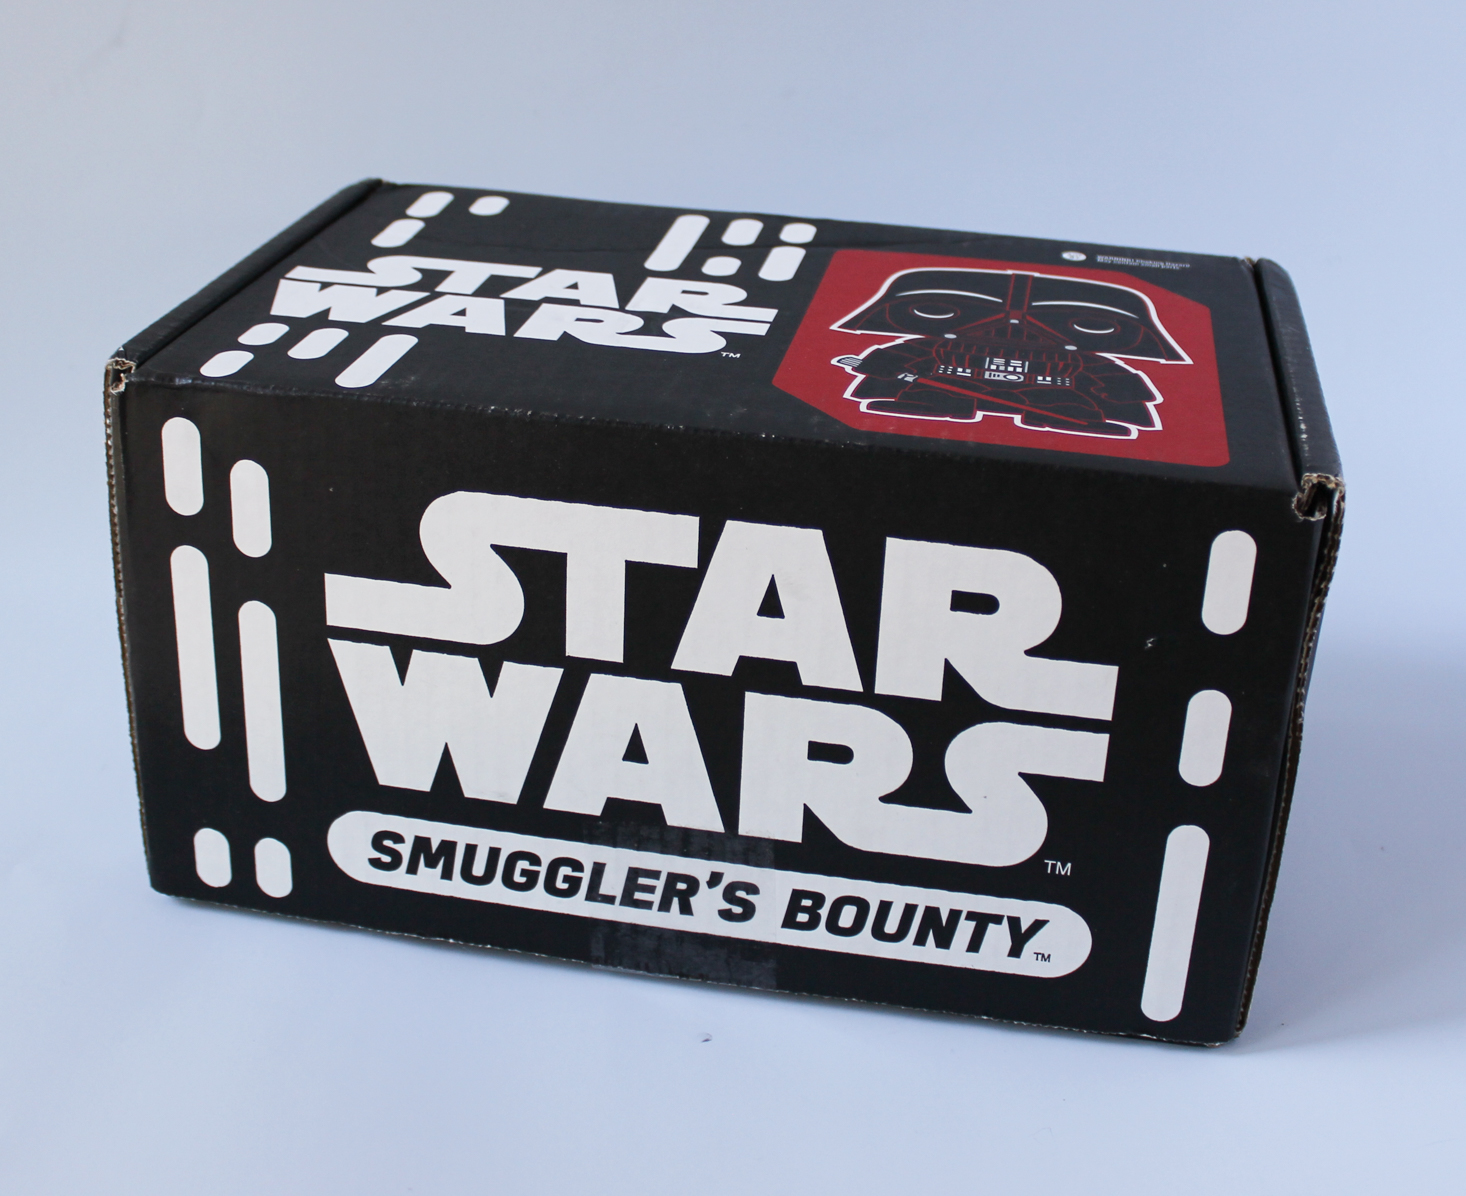 Star Wars Smuggler’s Bounty Subscription Box Review – Death Star